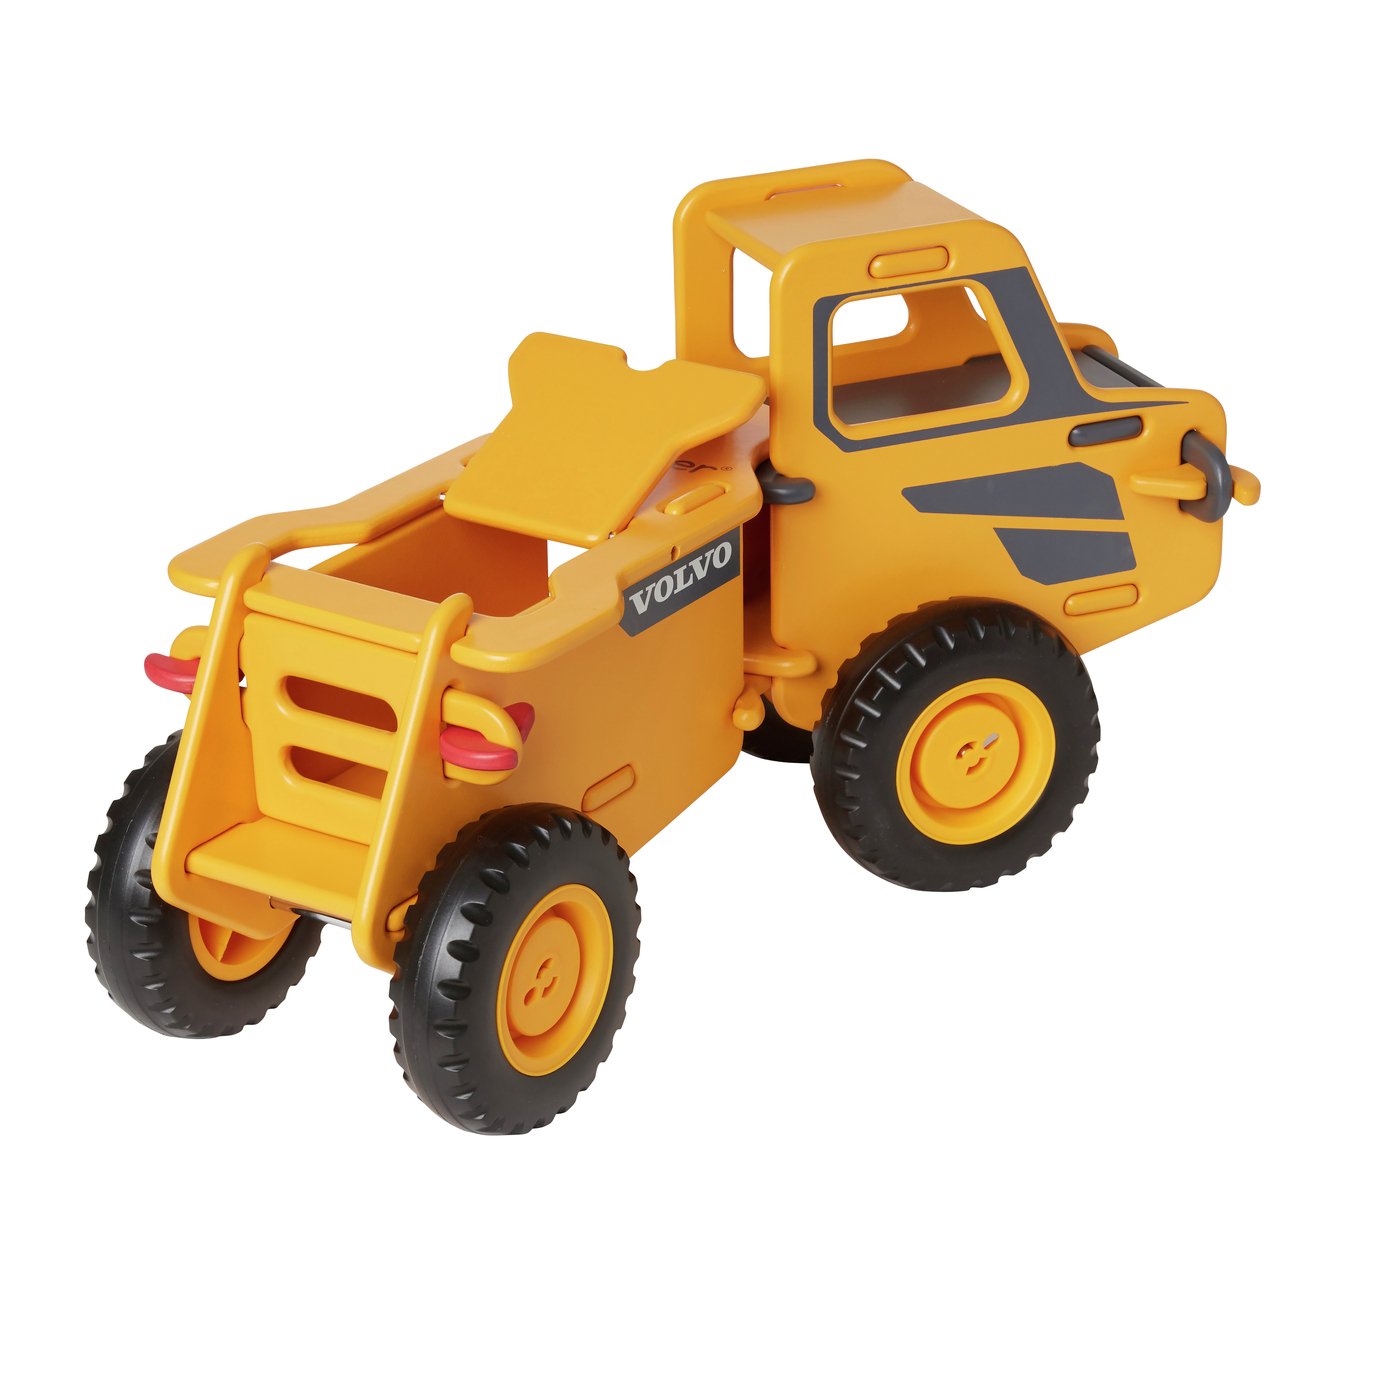 Moover Volvo Ride-On Truck Review